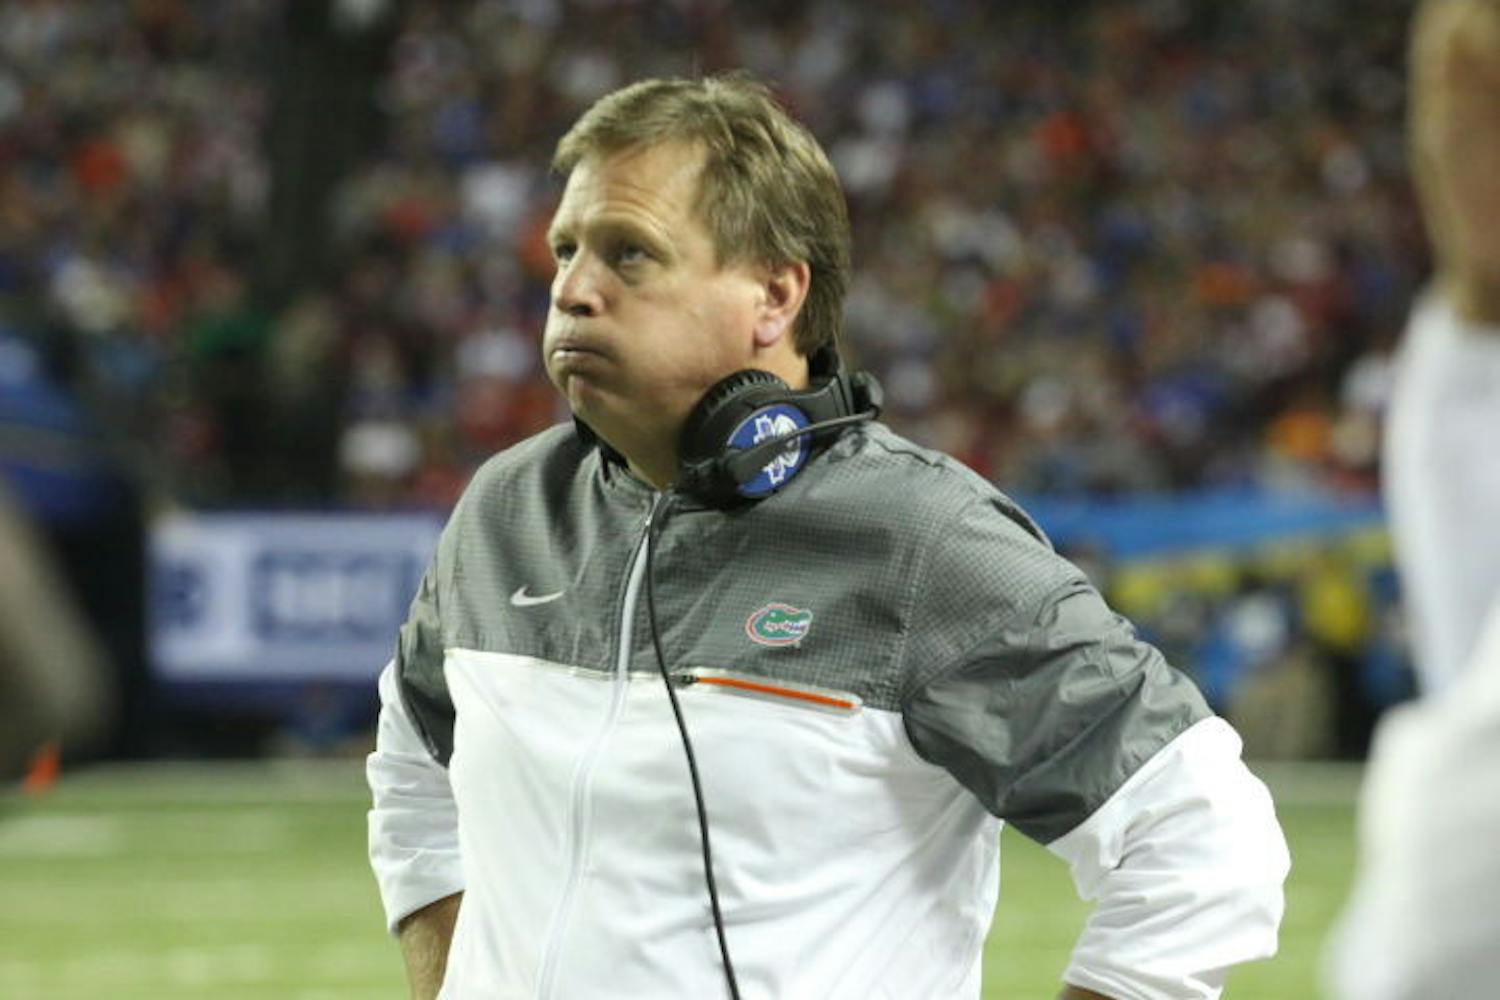 Jim McElwain looks on during Florida's 54-16 loss to Alabama in the SEC Championship Game on Dec. 3, 2016, in Atlanta.